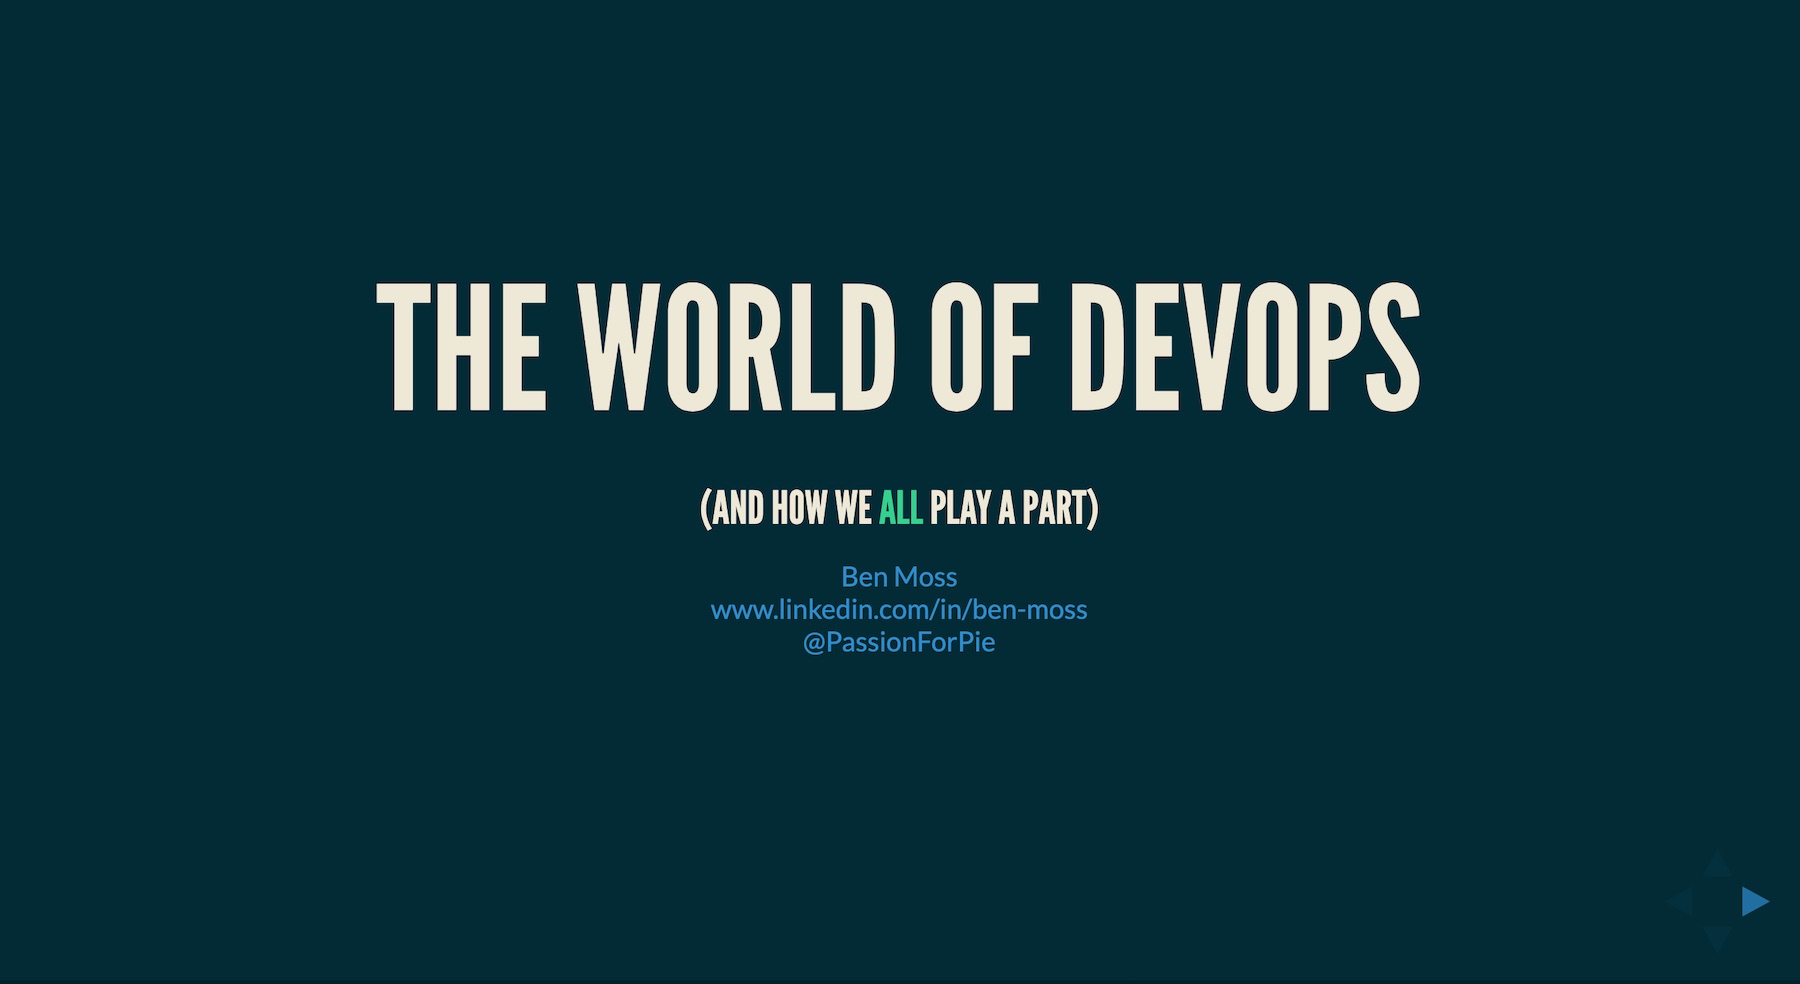 image from The World of DevOps (and how we all play a part)